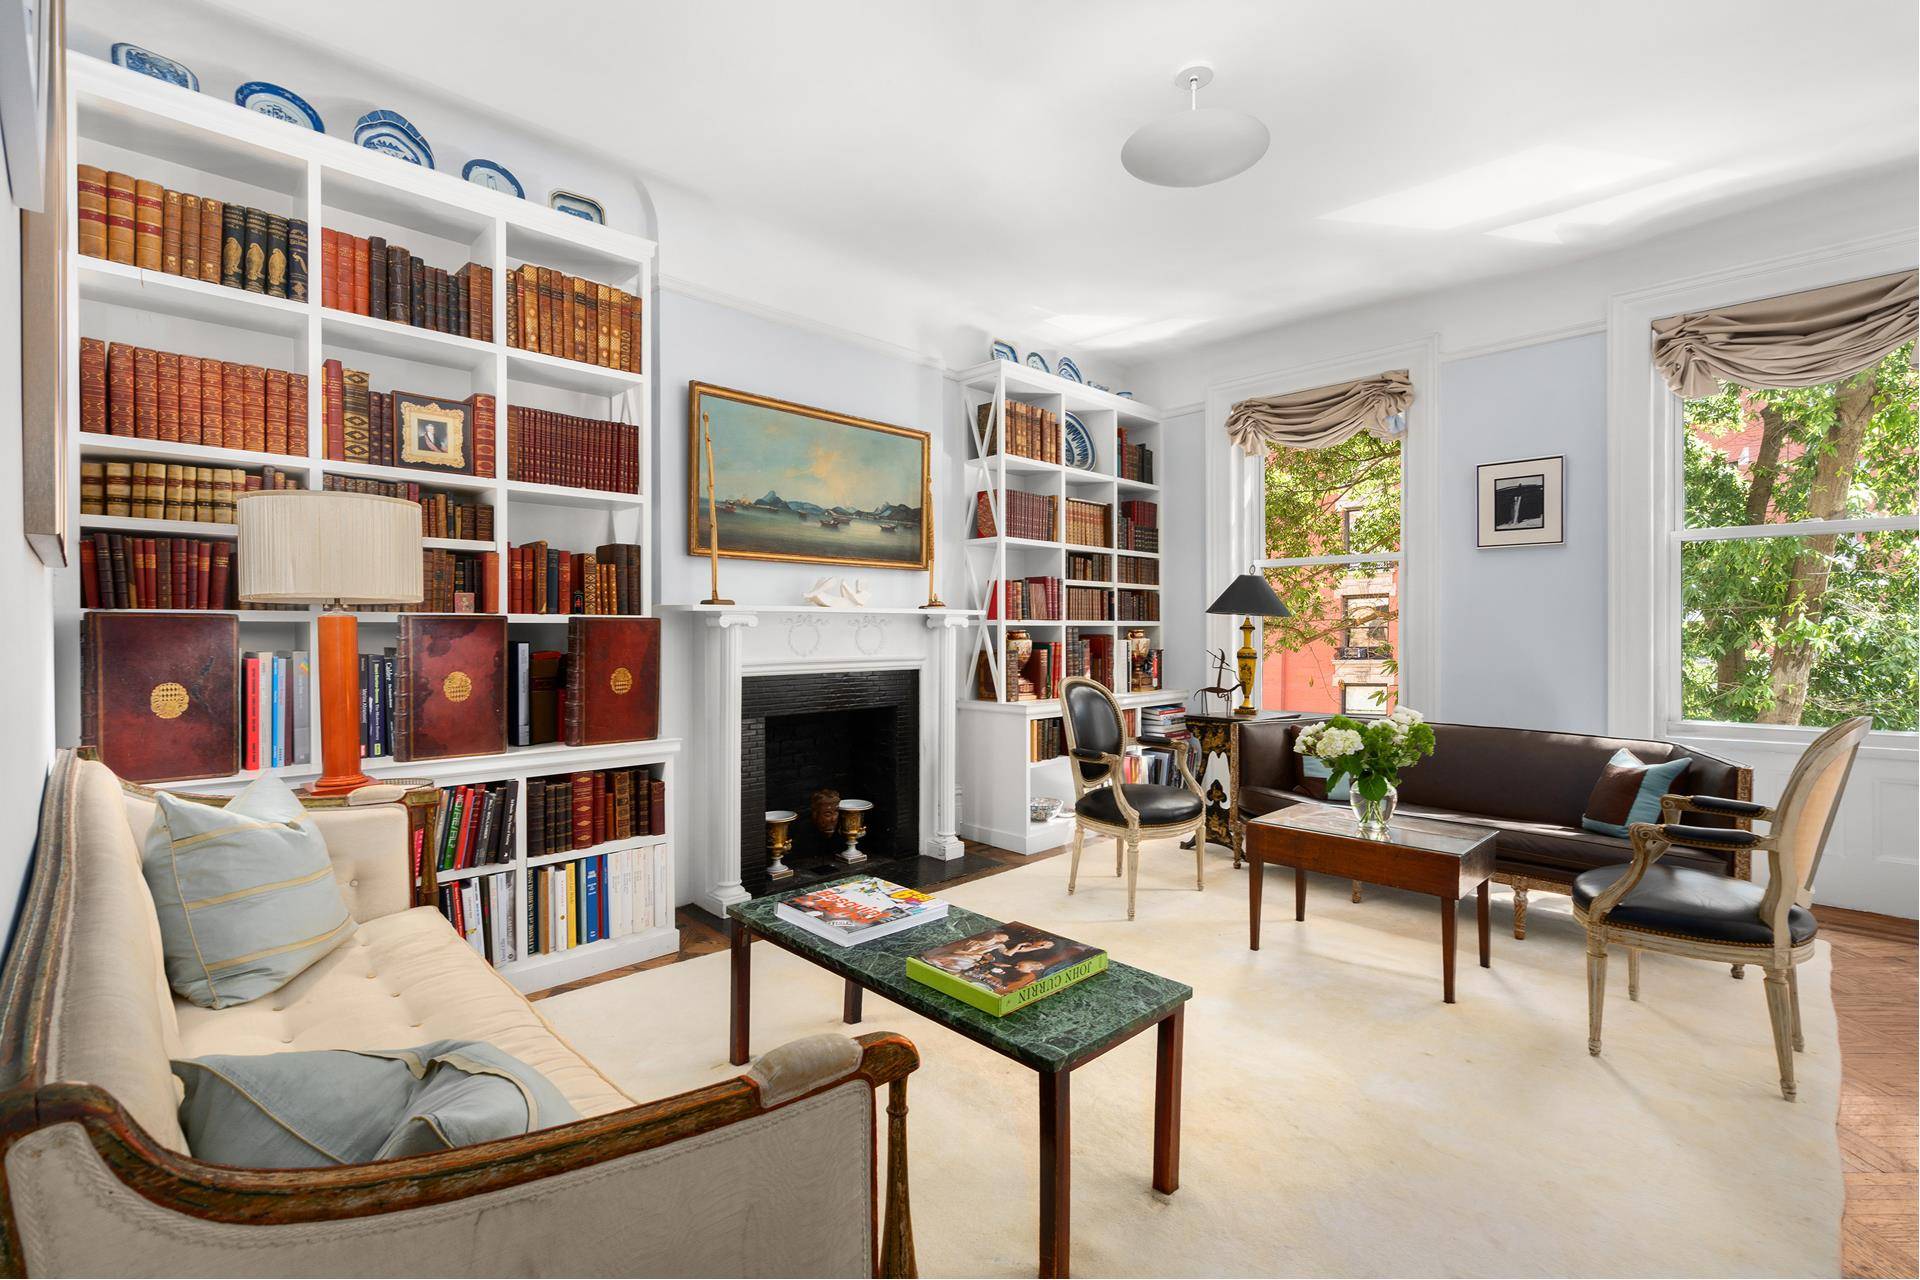 This bright three bedroom home in Carnegie Hill is right off Fifth Ave and next door to Central Park.